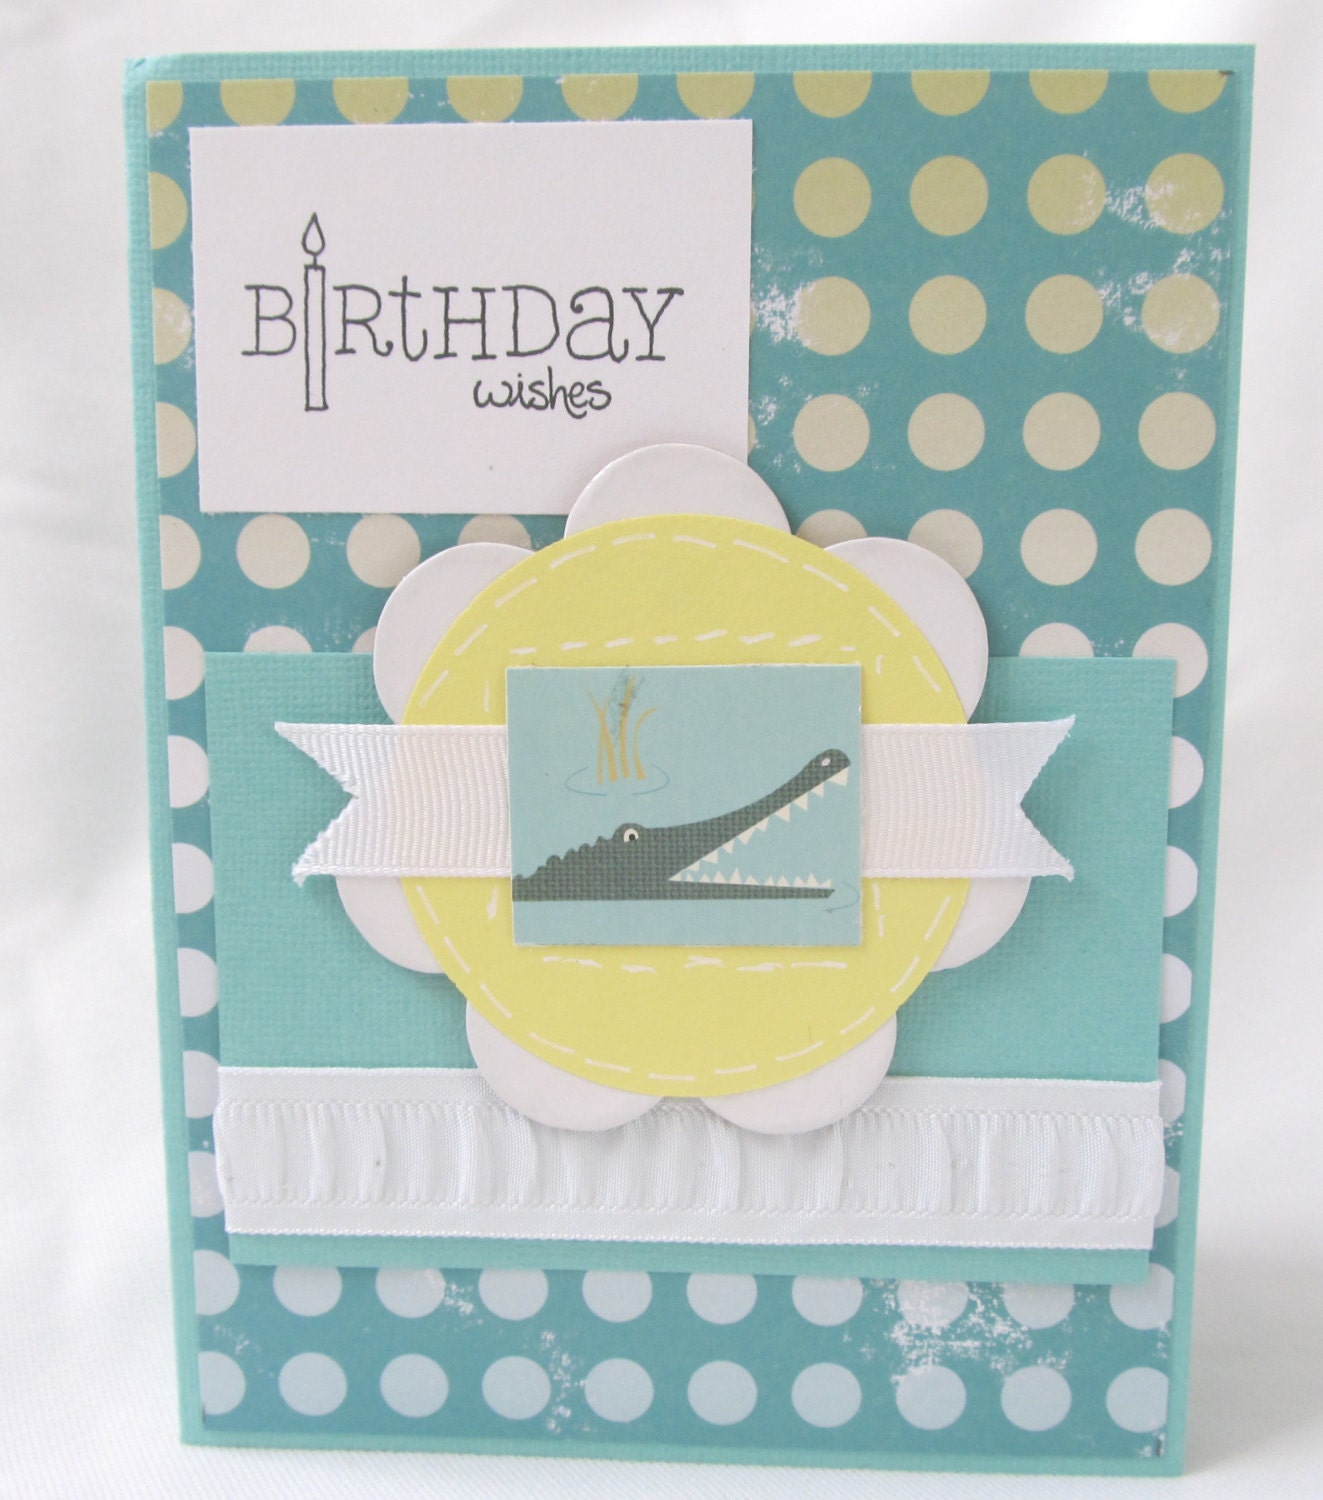 Handcrafted Card - Birrthday Card - Child's Birthday Card - Happy Birthday - Alligator - Turquoise and Yellow - Blank Card - Hand Stamped - PrettyByrdDesigns